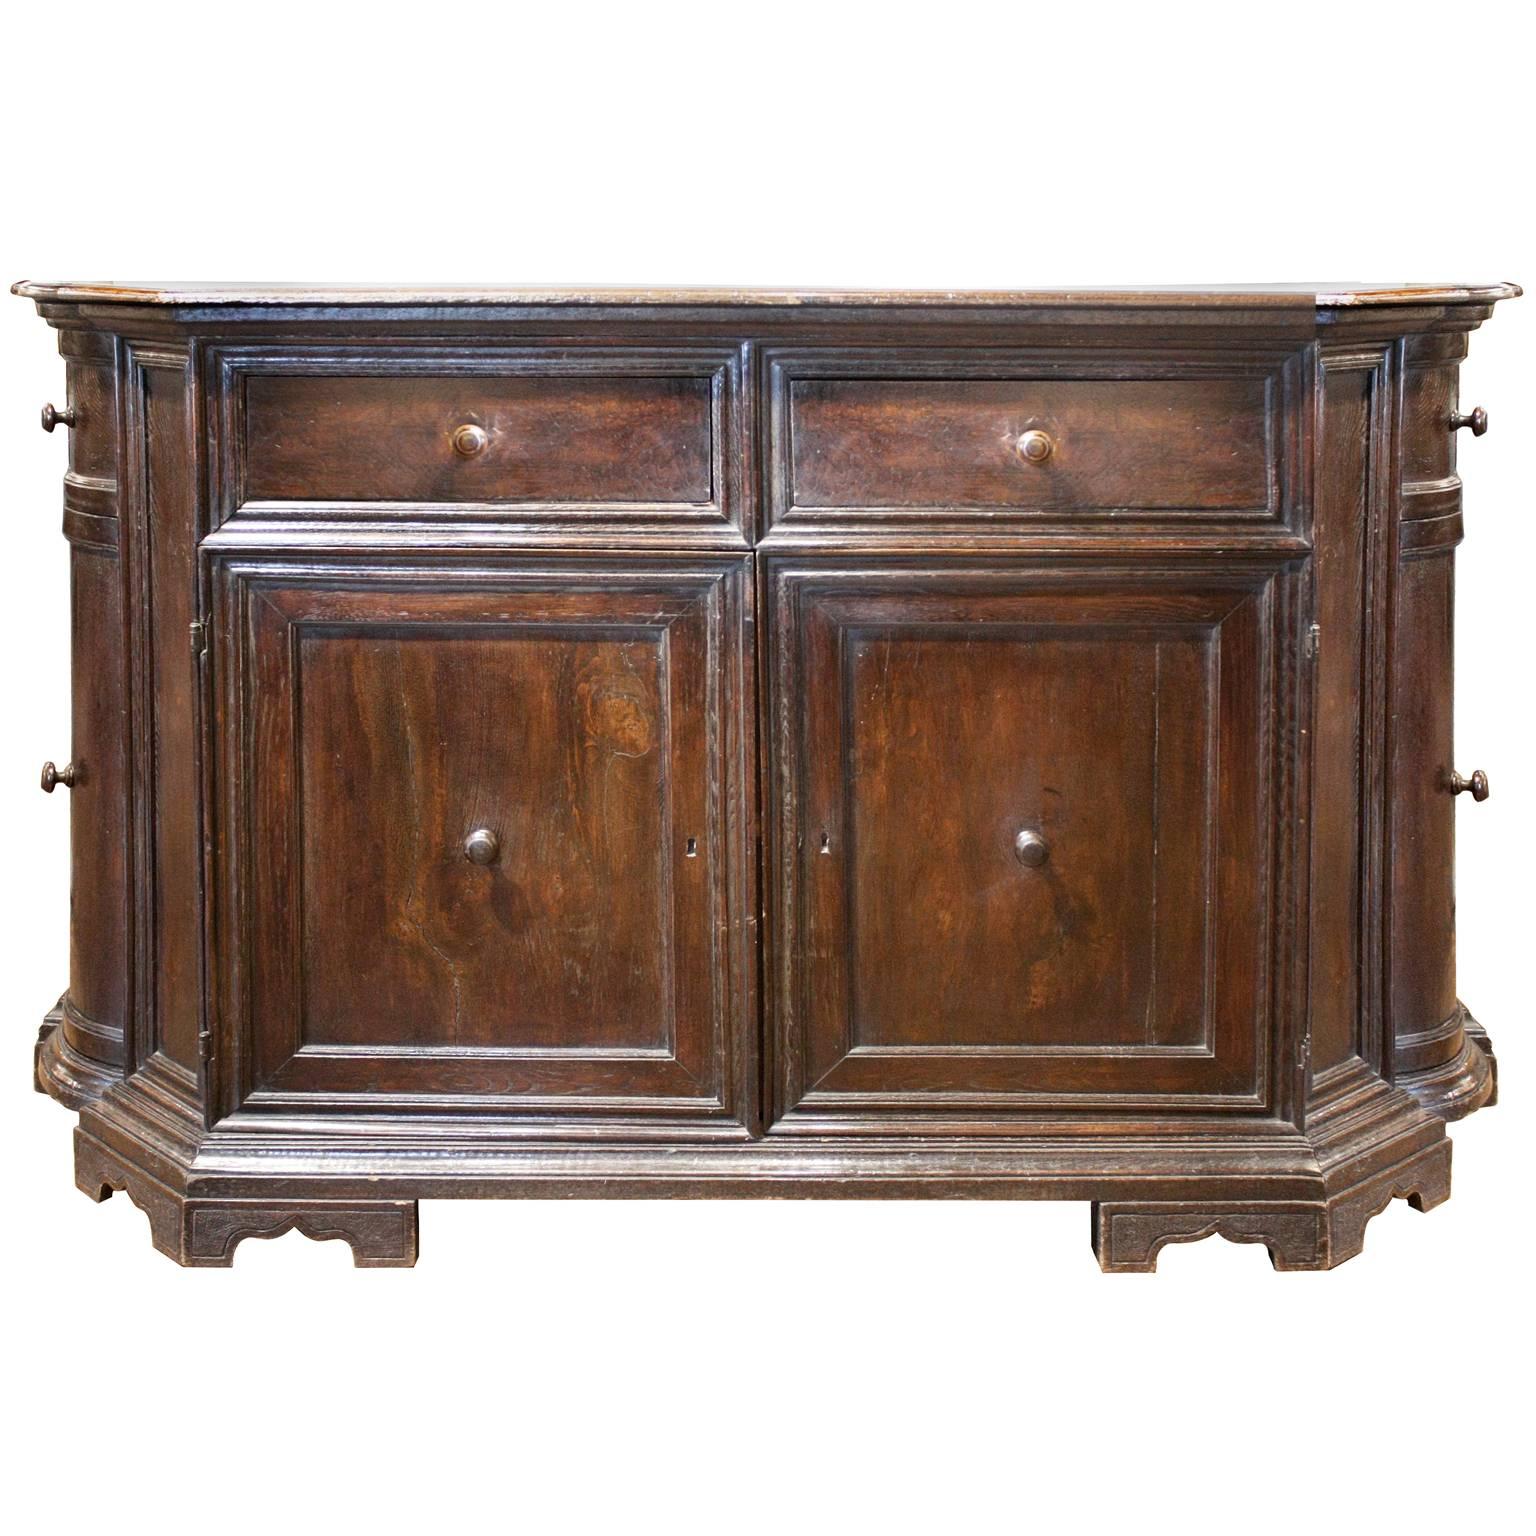 European 1850s Walnut Credenza with Two Drawers, Double Doors and Convex Sides